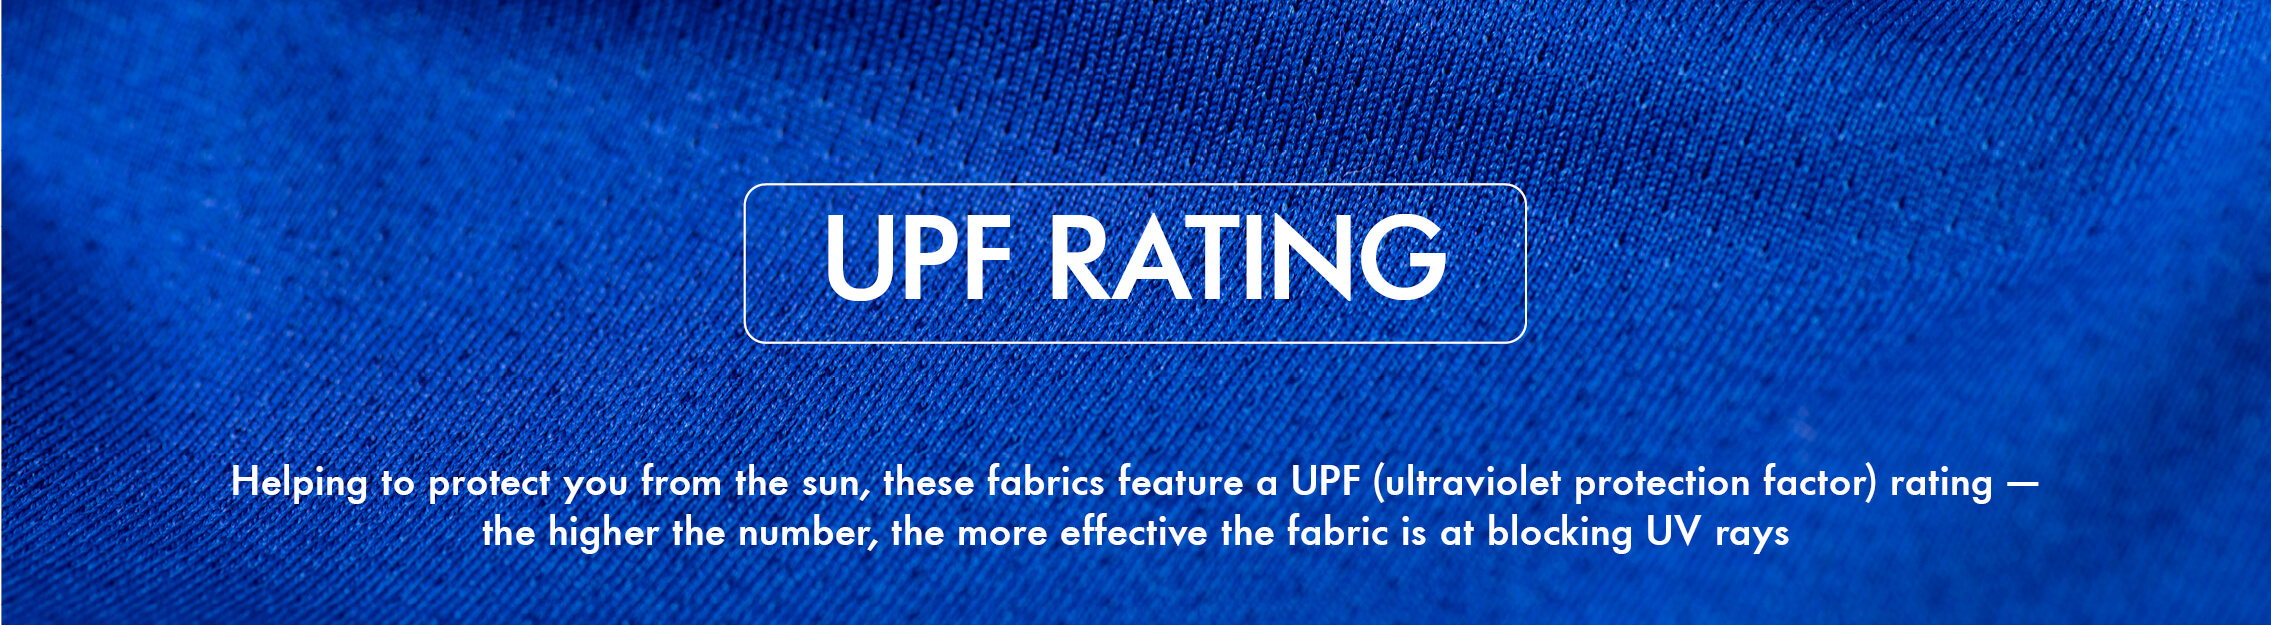 UPF, helping to protect you from the sun, these fabrics feature a UPF rating